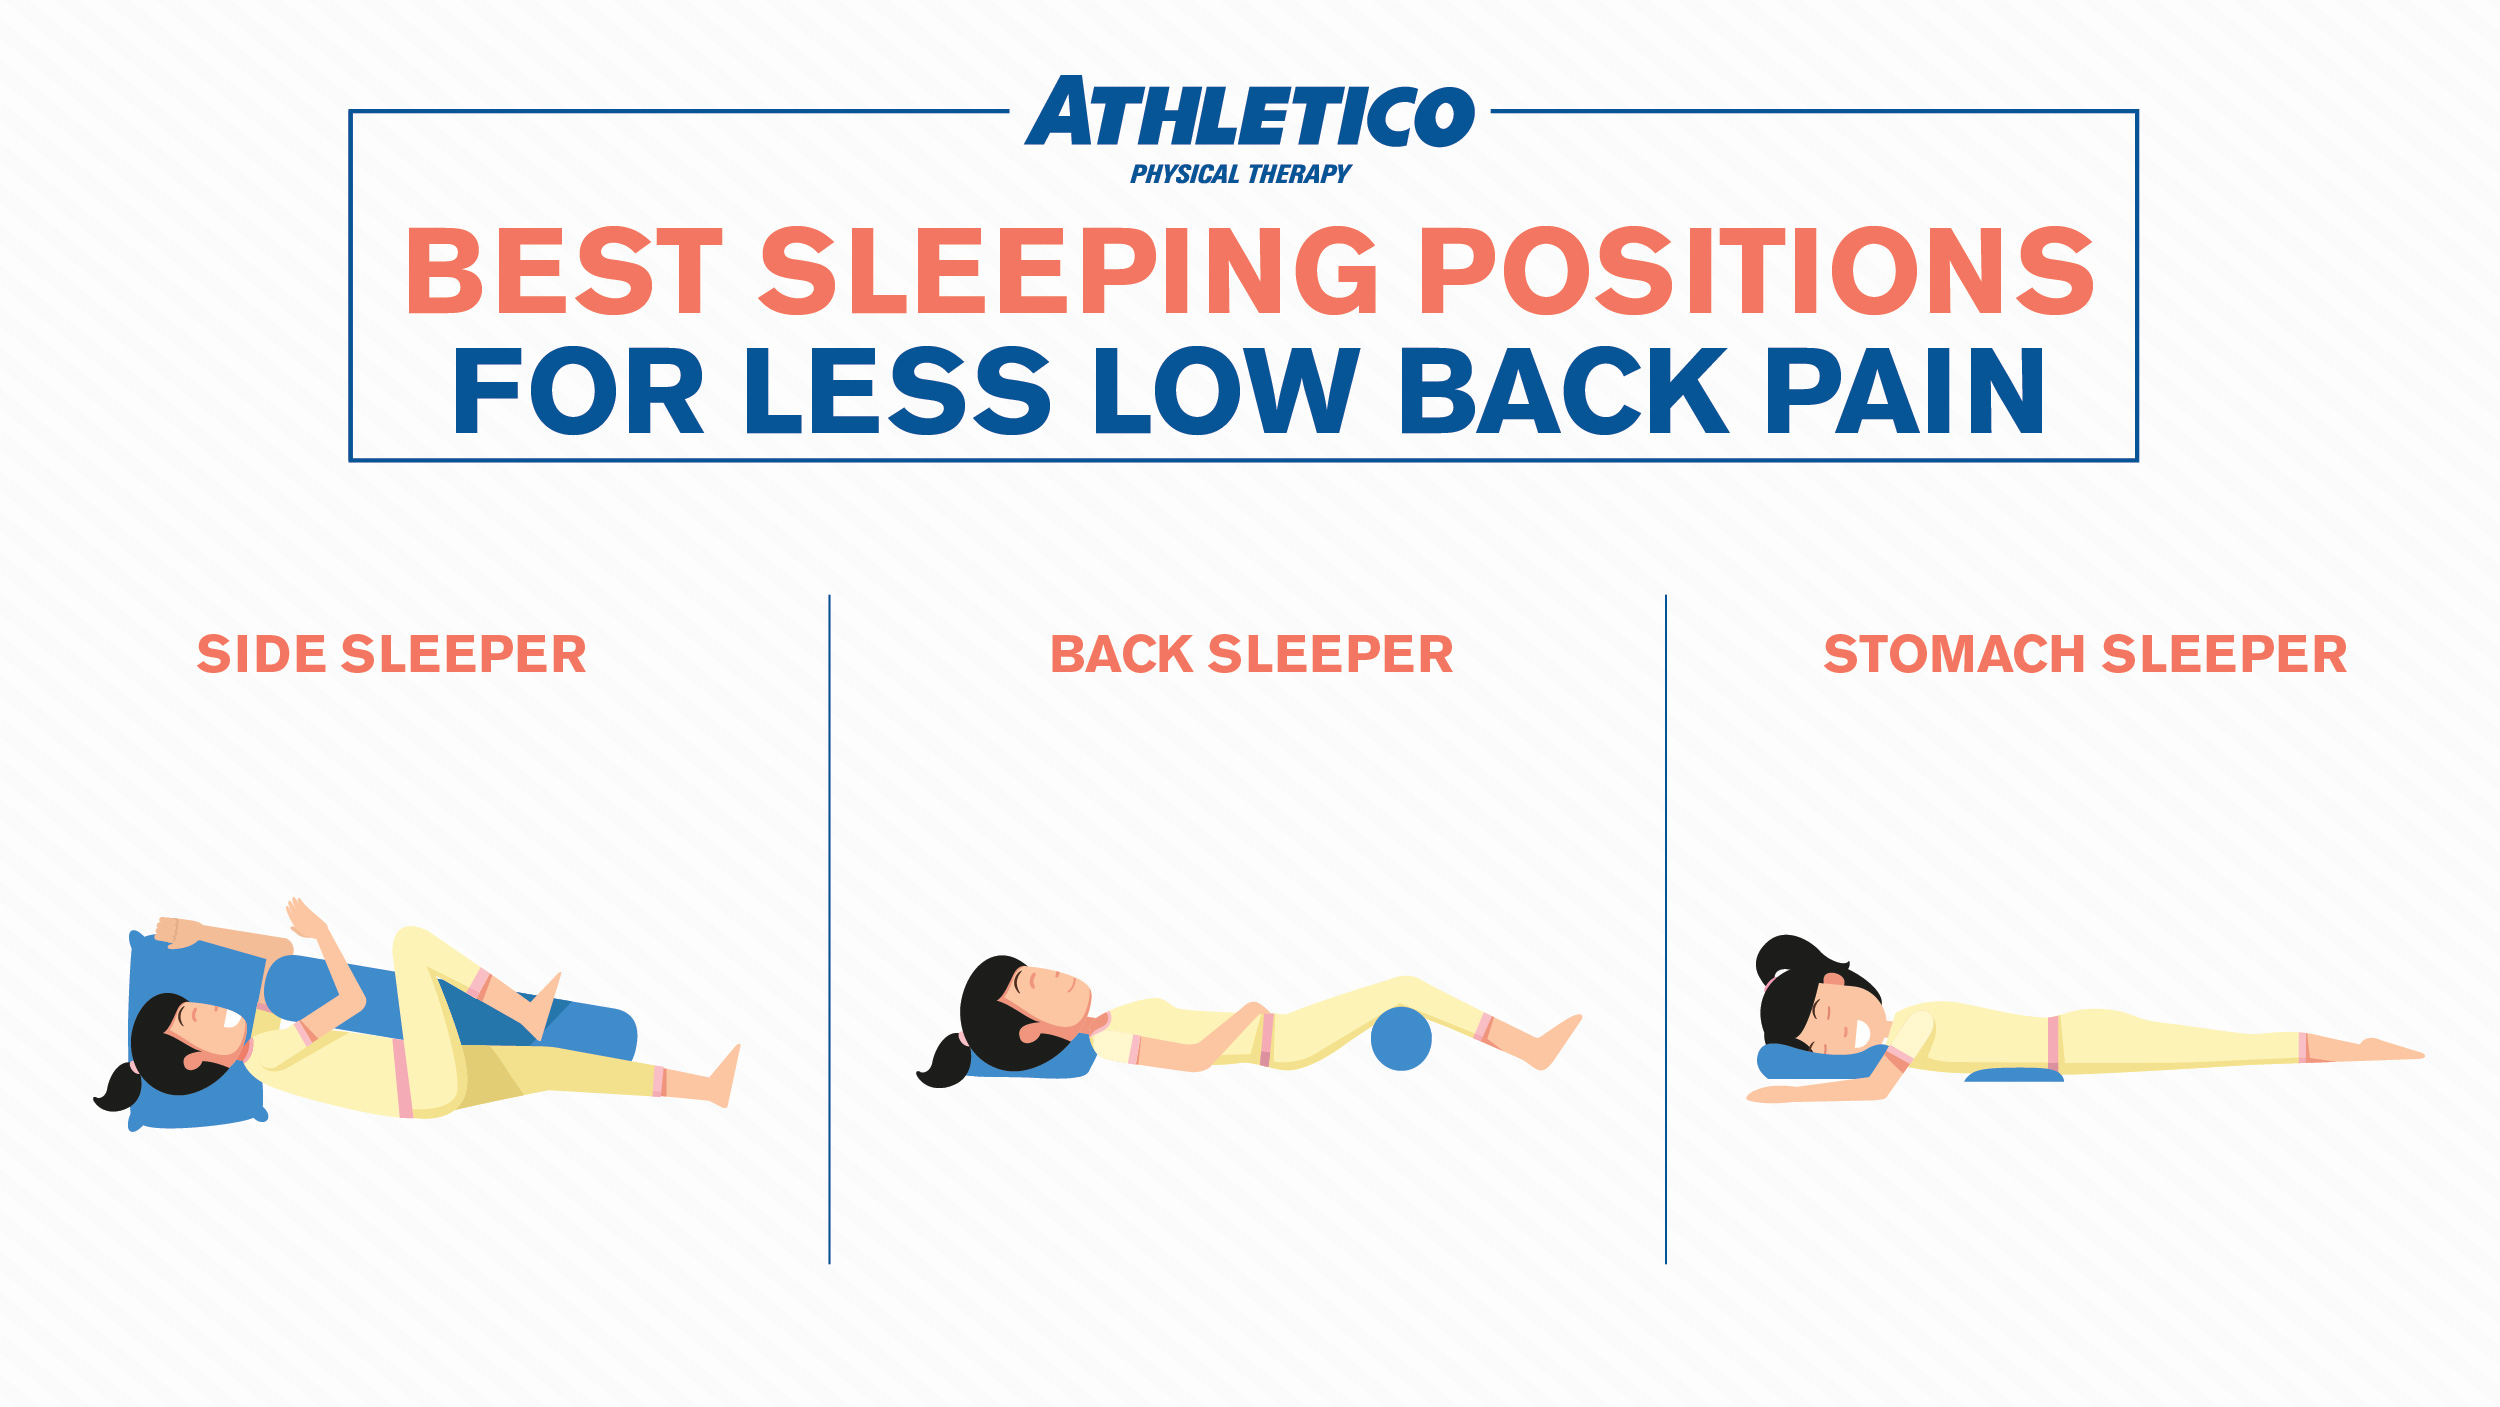 pillow position for back pain